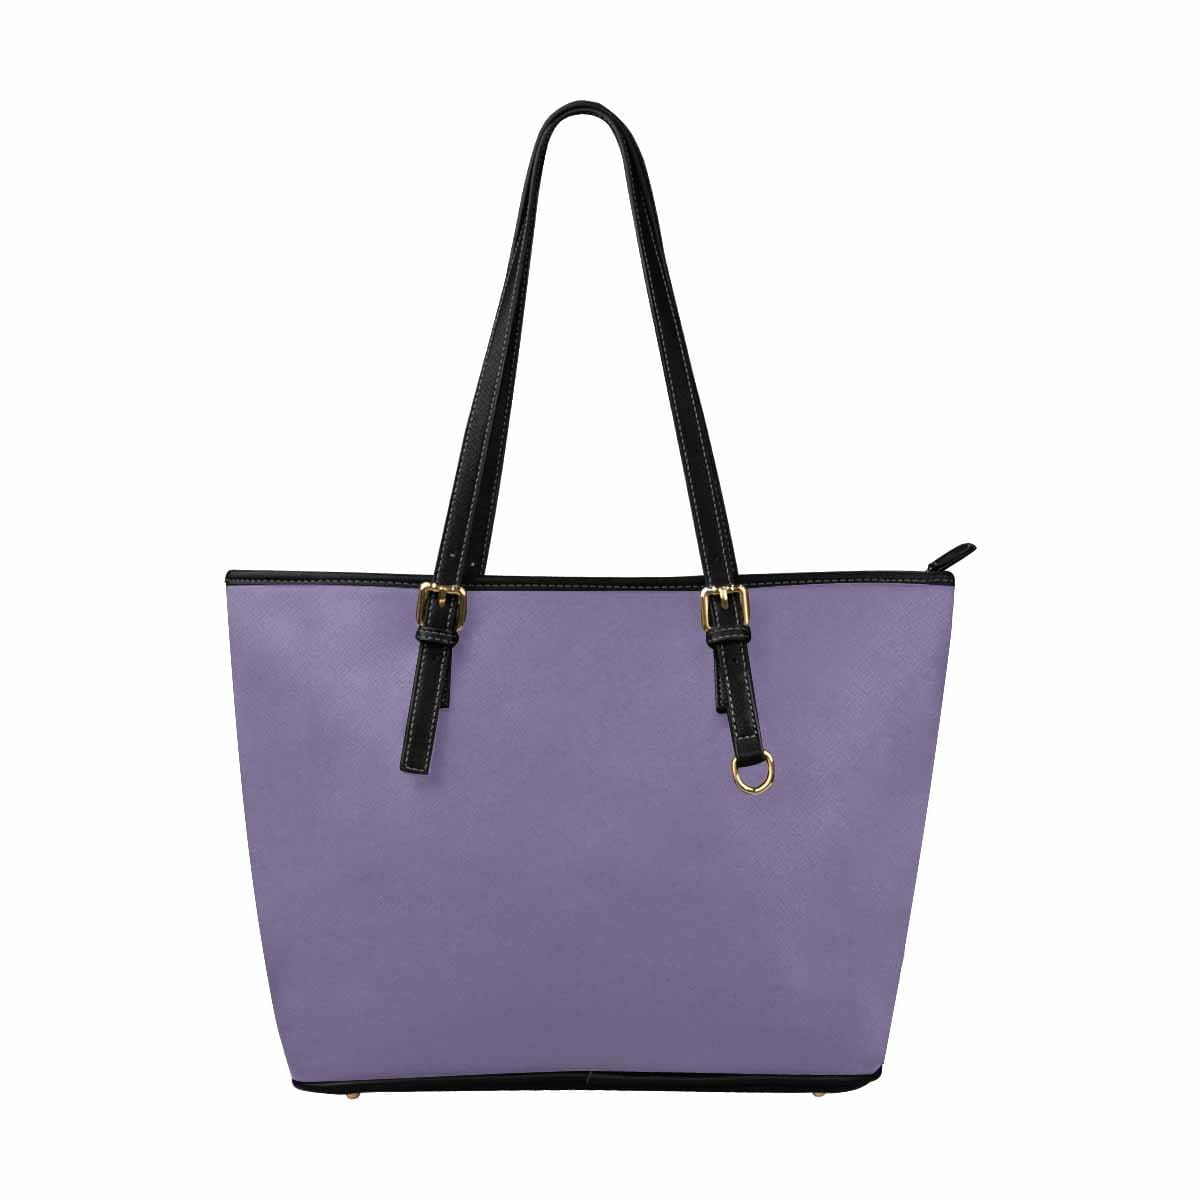 Large Leather Tote Shoulder Bag - Purple Haze - Bags | Leather Tote Bags